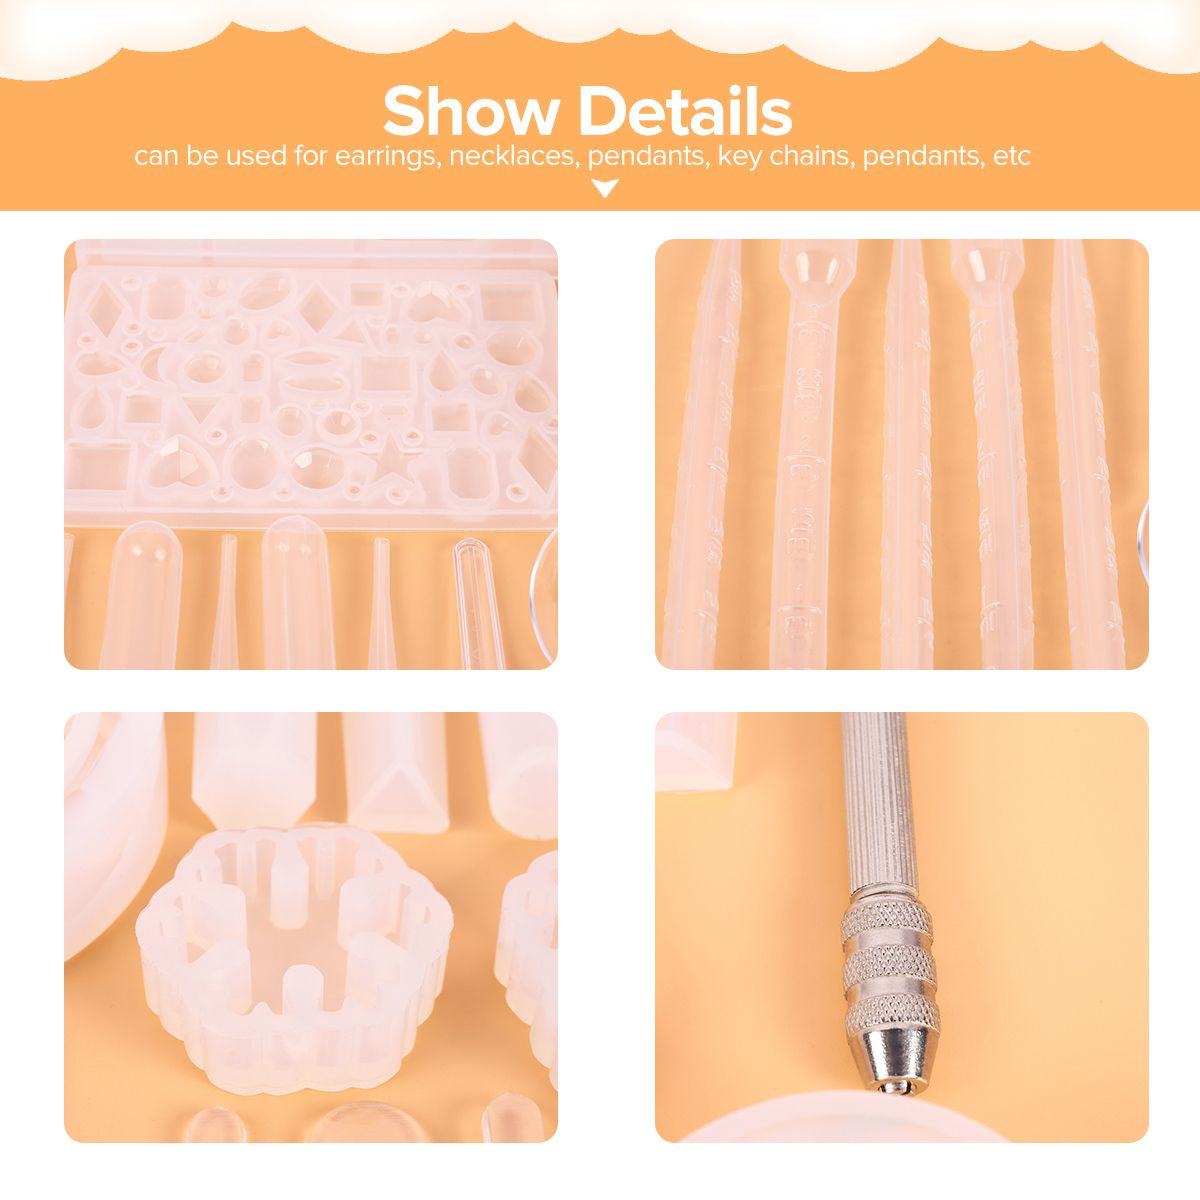 127PCS-Silicone-Pendant-Mould-Jewelry-Making-Necklace-DIY-Mold-Set-Craft-Easy-1741190